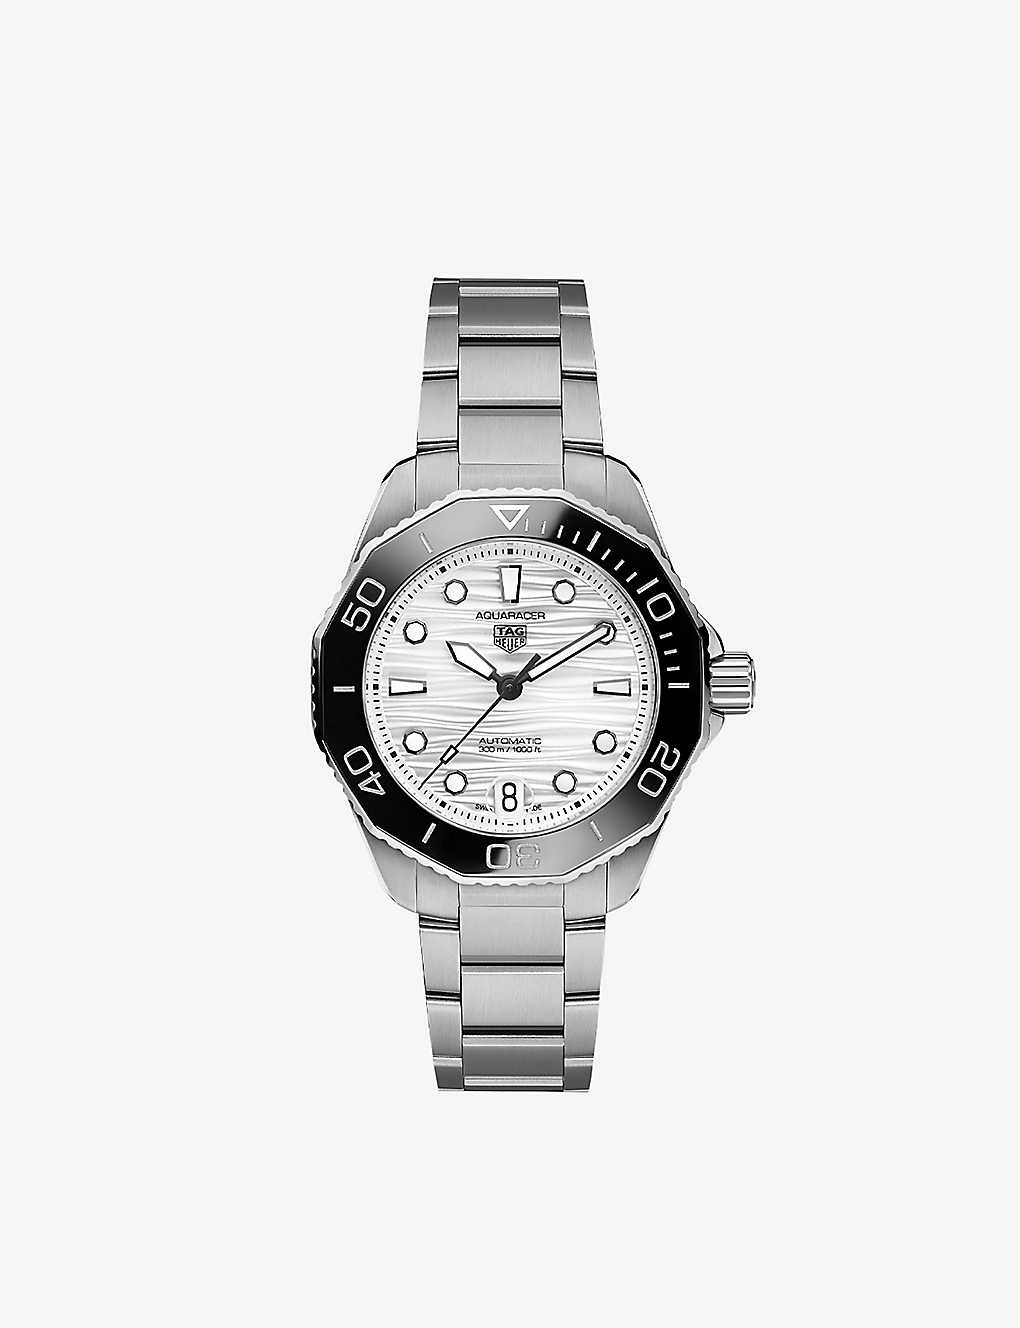 Tag Heuer Aquaracer Automatic Silver Dial Ladies Watch Wbp231c.ba0626